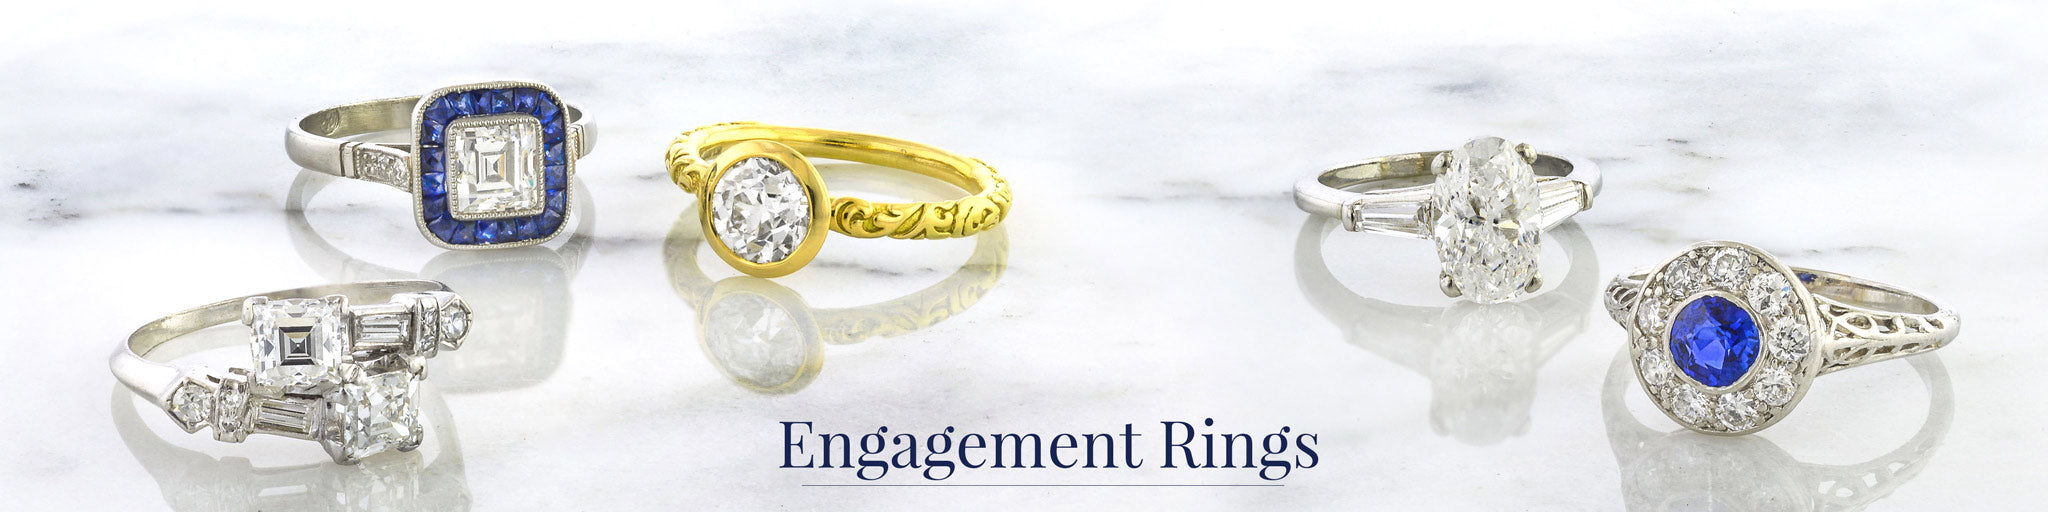 Vintage Engagement Rings - Yellow Gold | FW Custom Jewelry